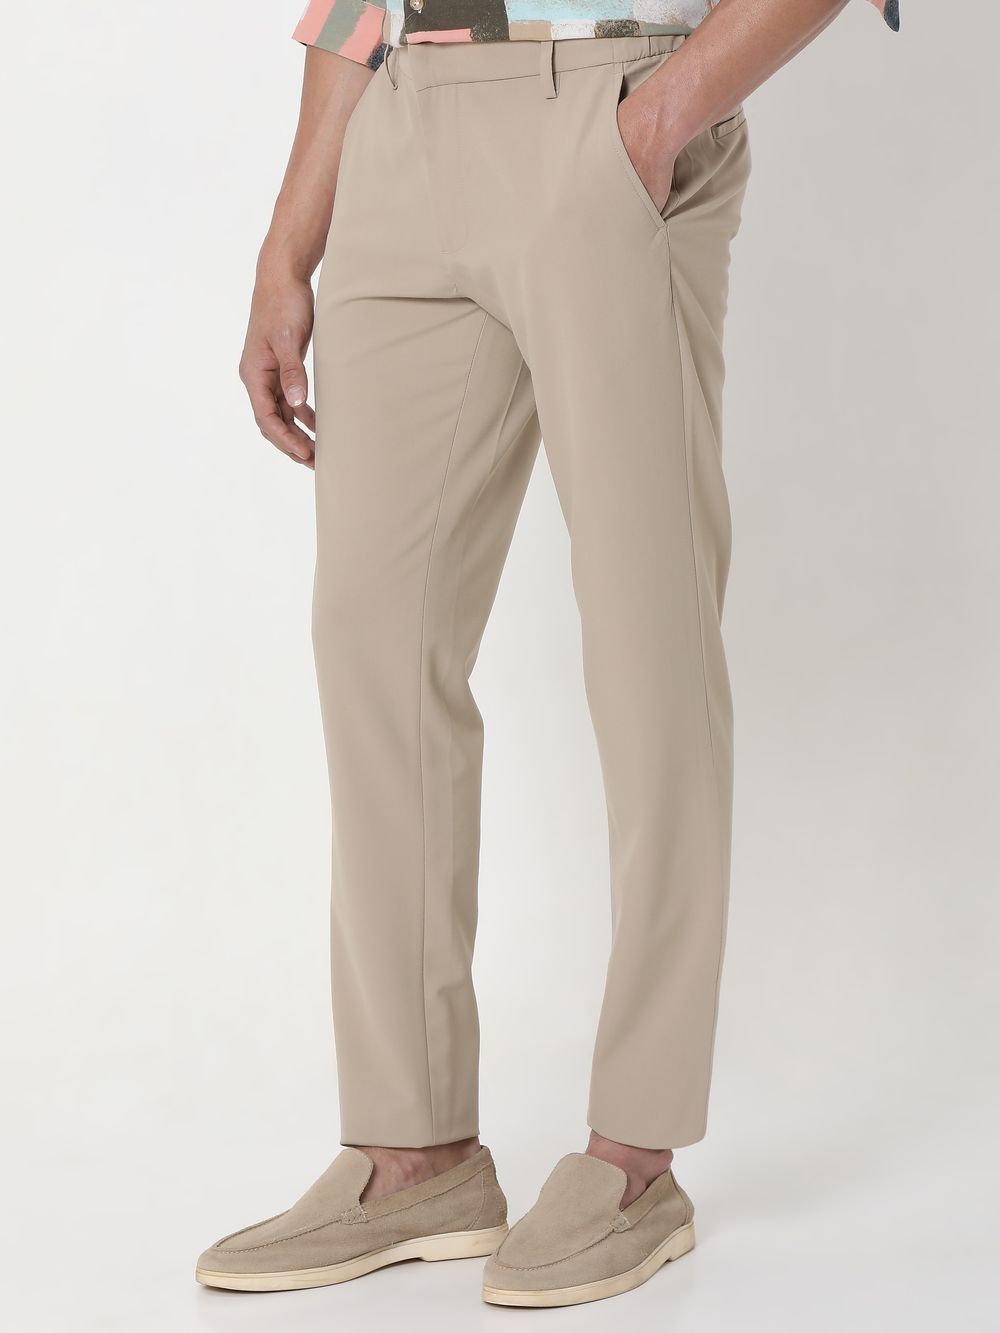 Beige Ankle Length Stretch Chinos